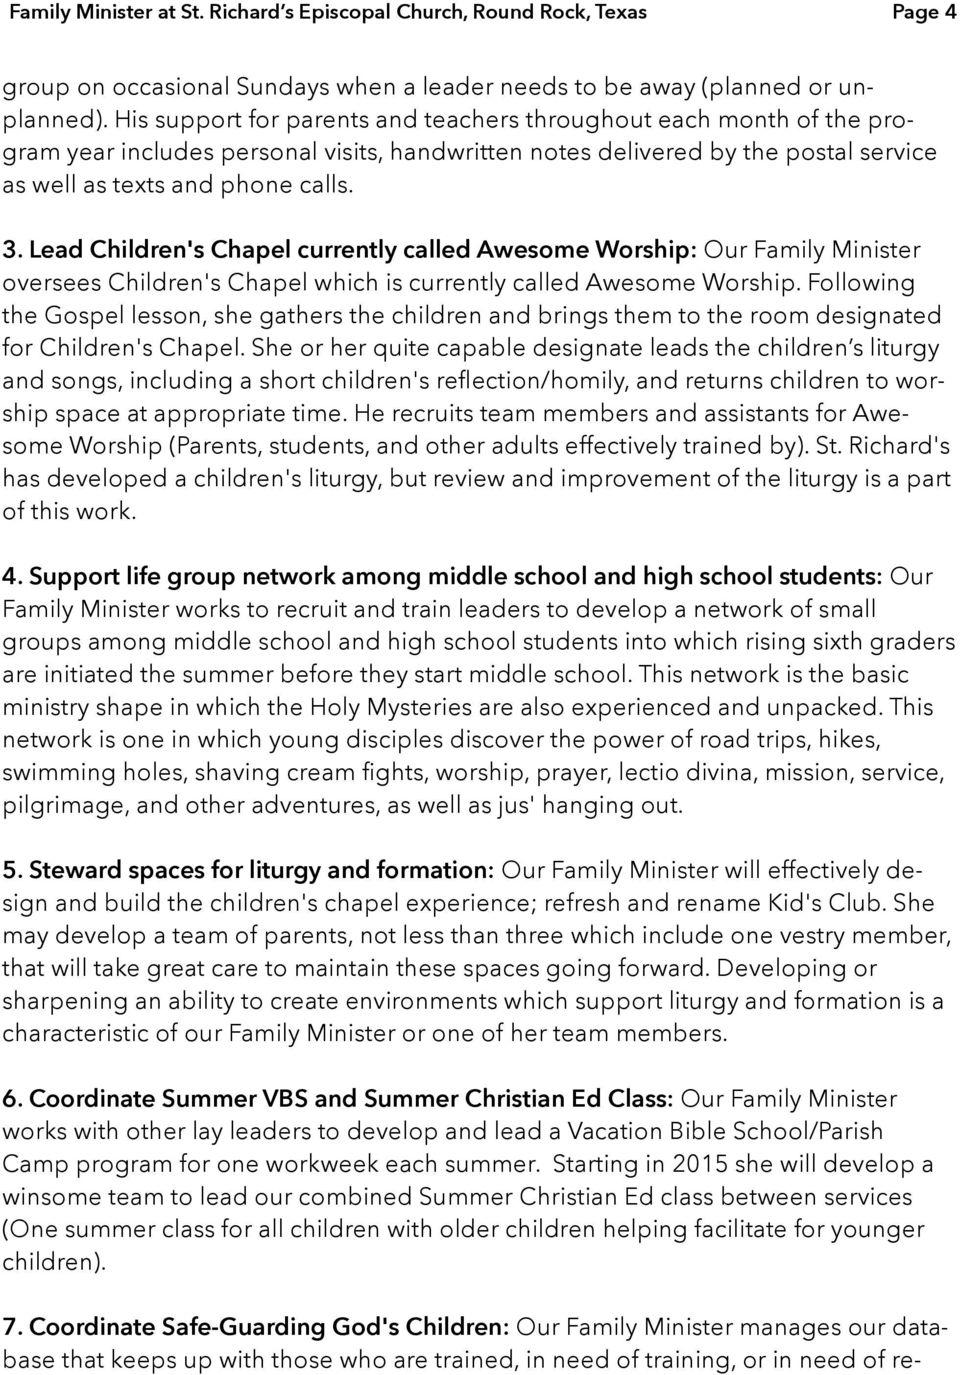 Lead Children's Chapel currently called Awesome Worship: Our Family Minister oversees Children's Chapel which is currently called Awesome Worship.